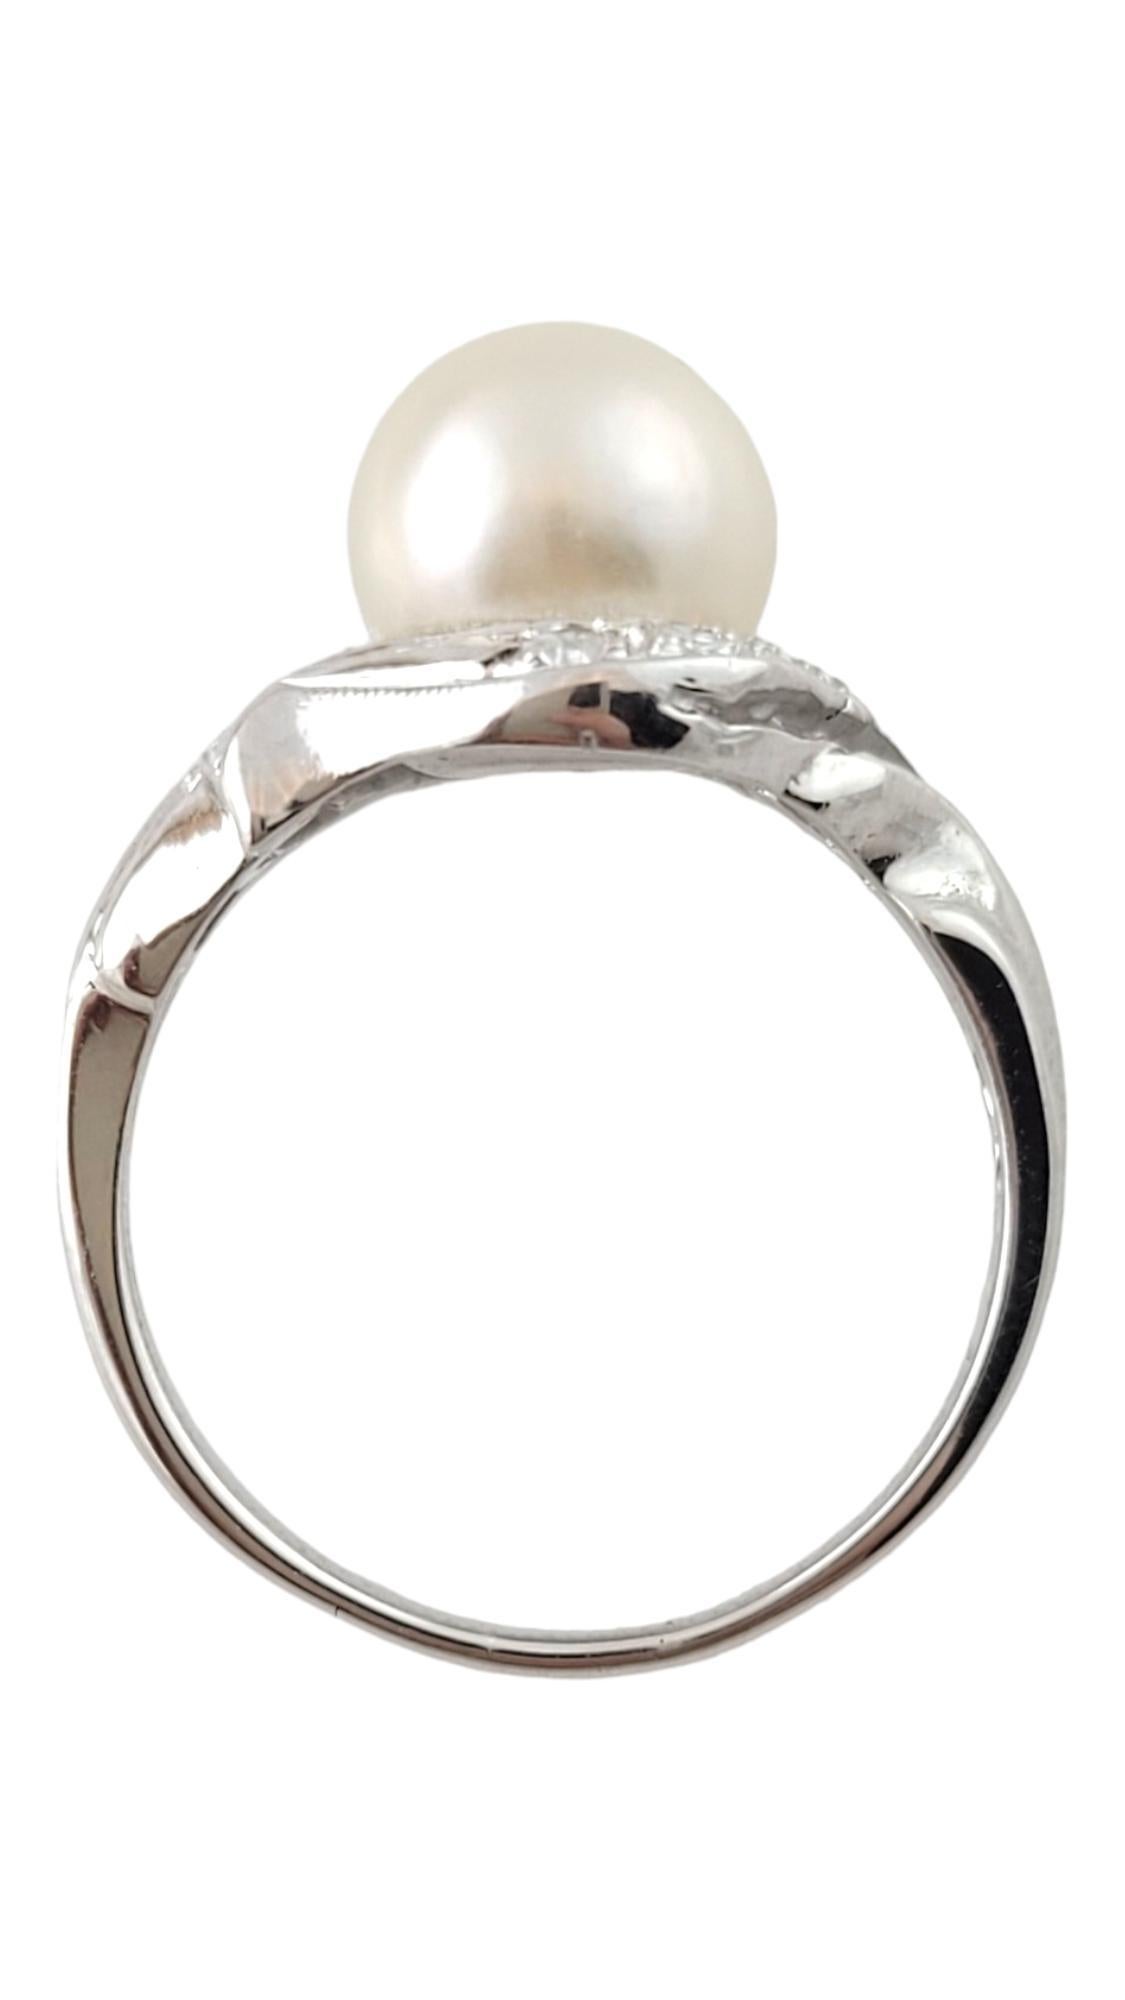 Single Cut 14K White Gold Diamond and Pearl Ring Size 5.25 #16424 For Sale